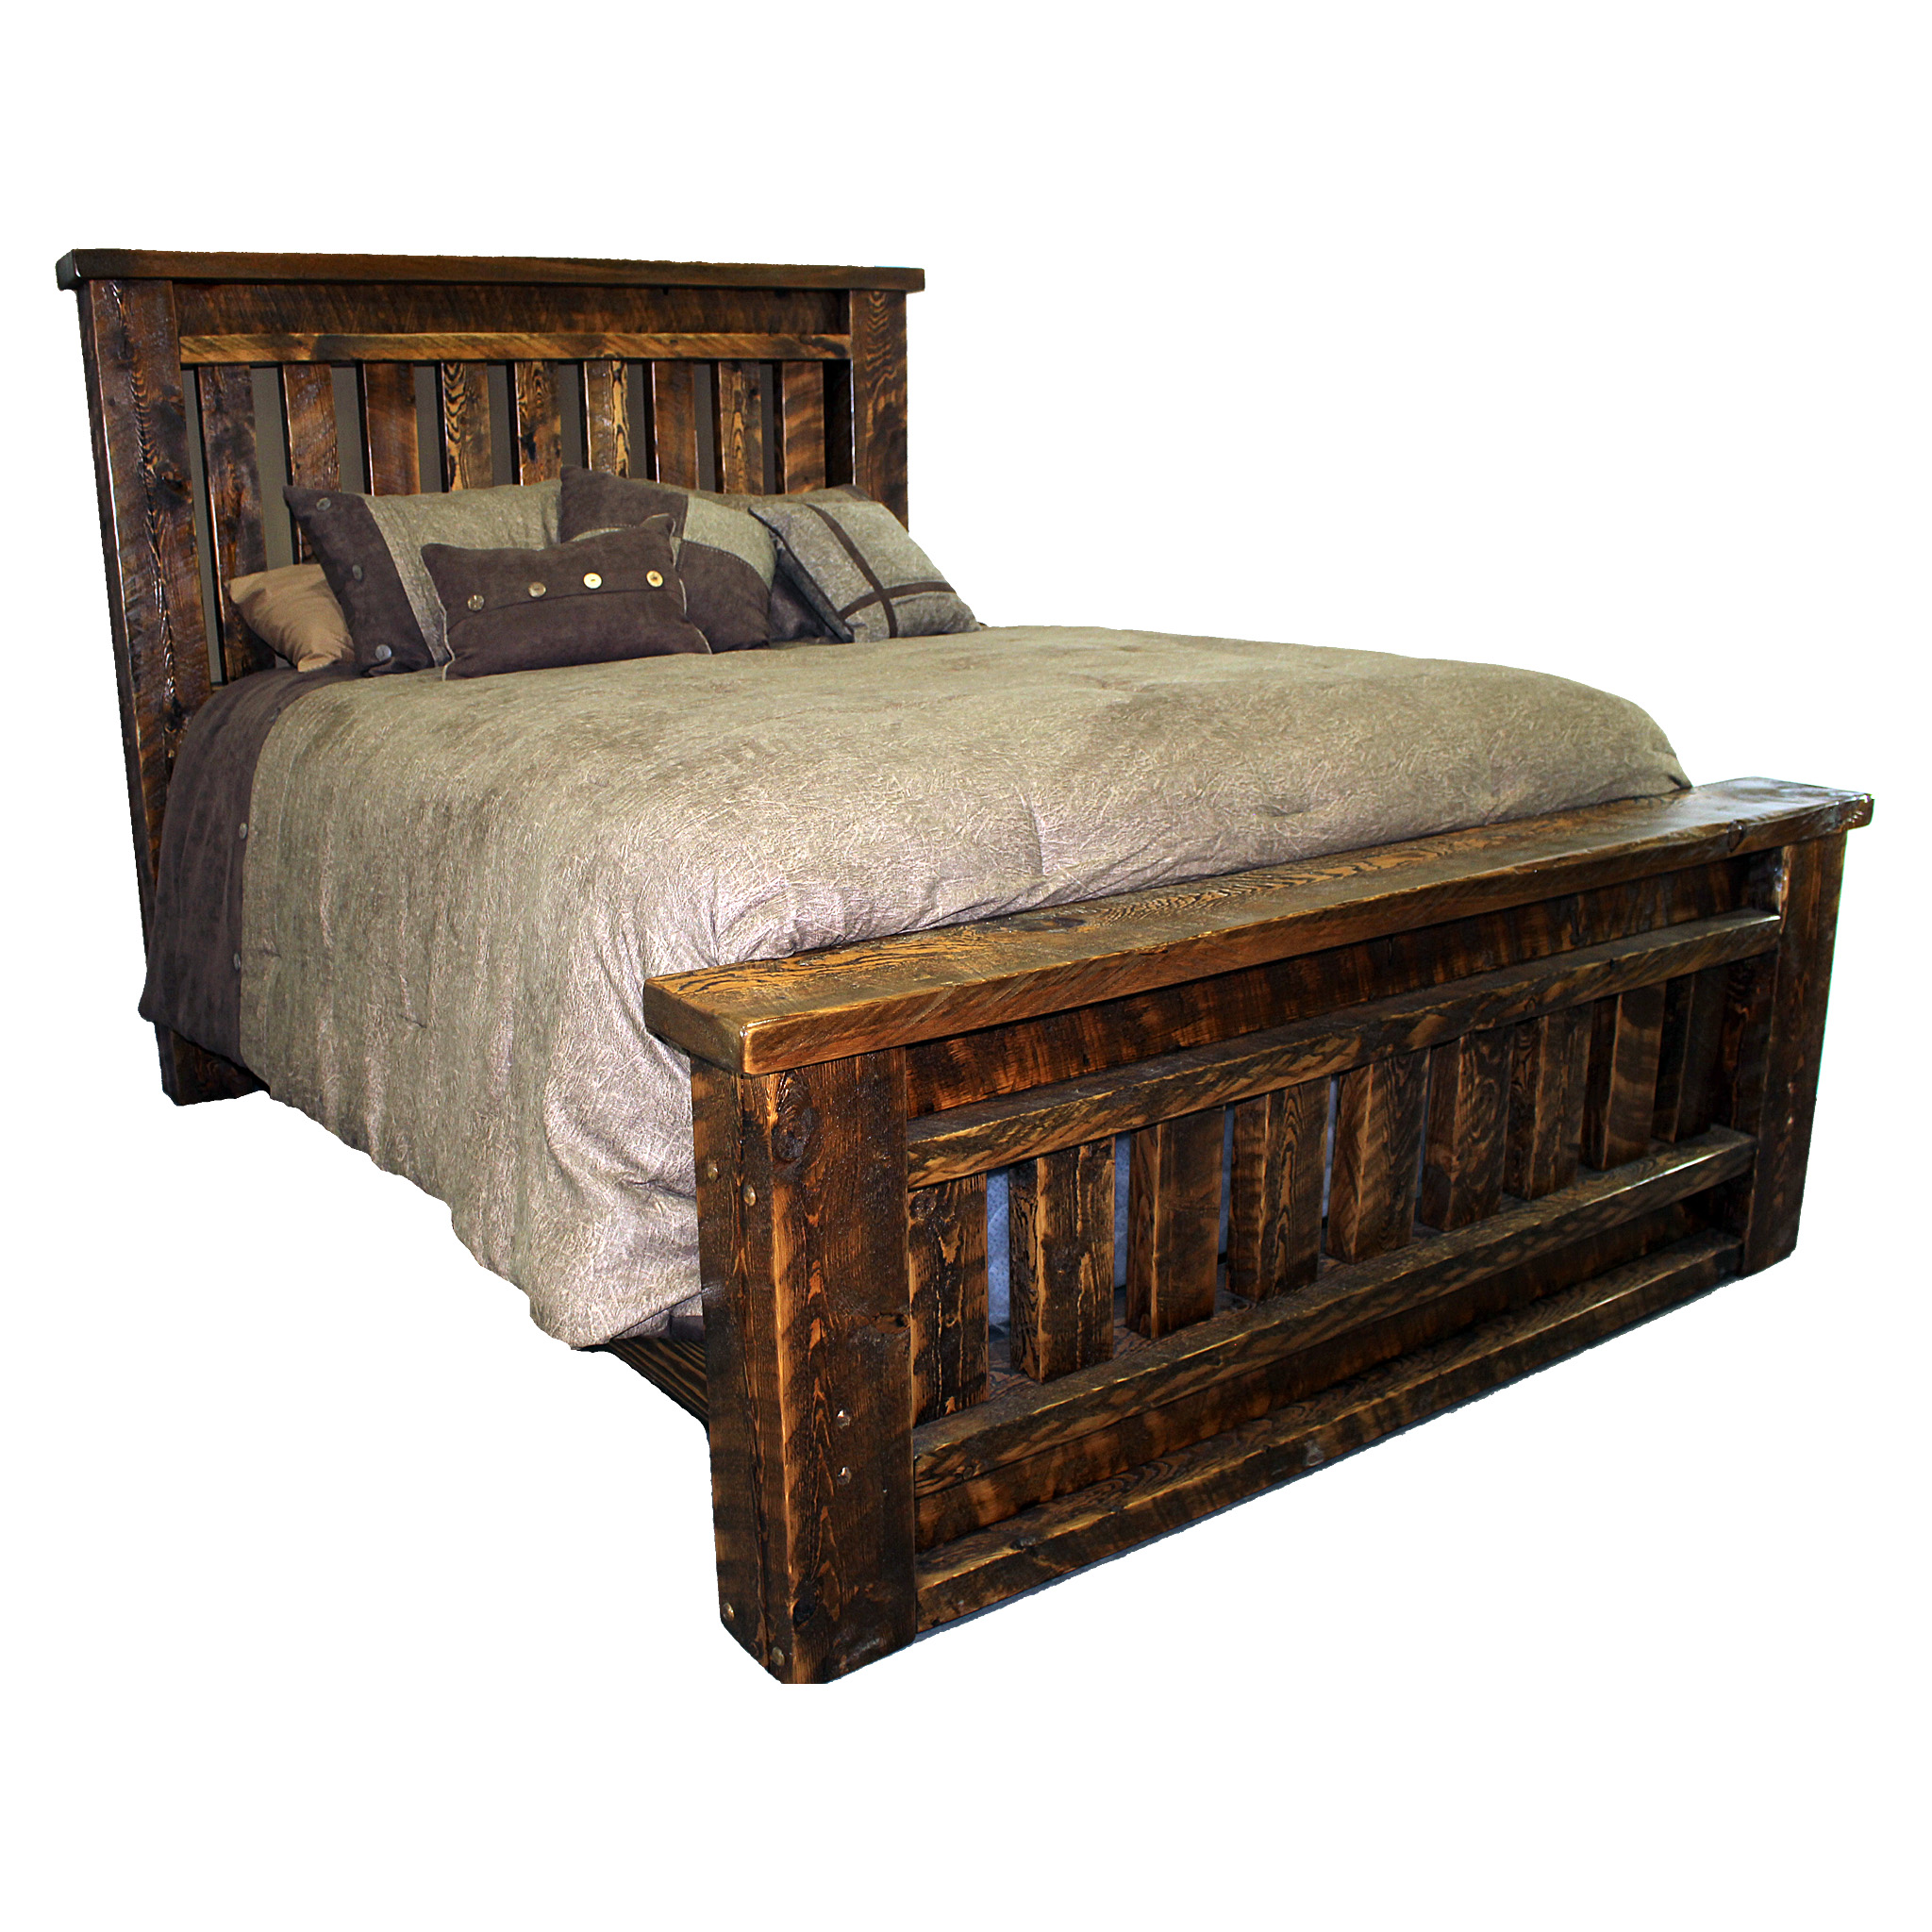 Rustic Wood Mission Bed Four Corner, Mission Style California King Bed Frame